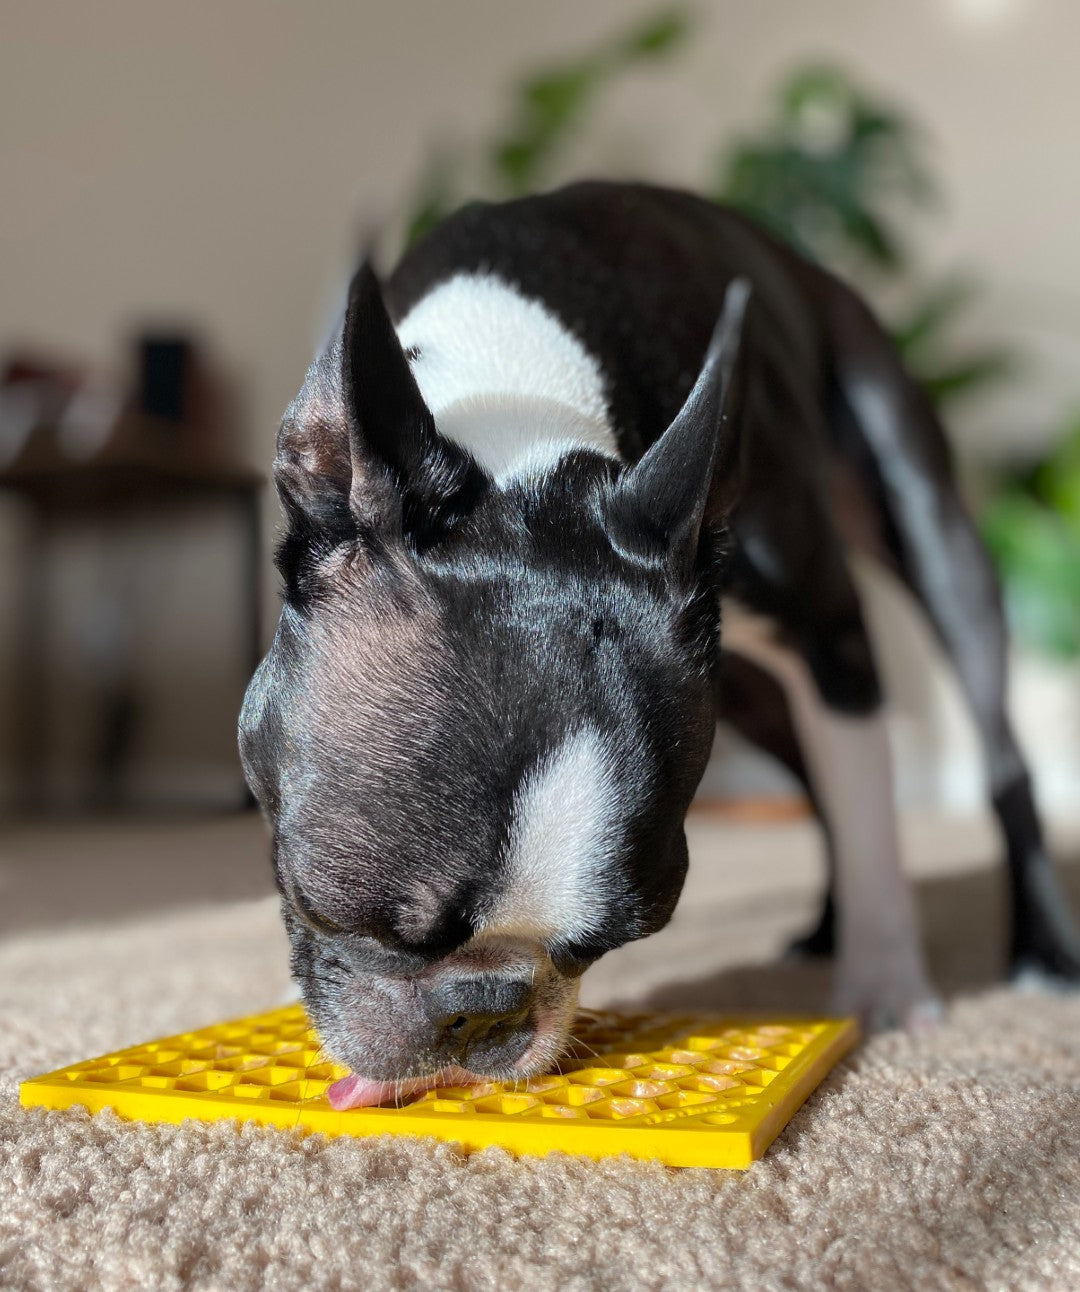 What To Put On A Lick Mat For Dogs? 8 Best Lick Smacking Recipes